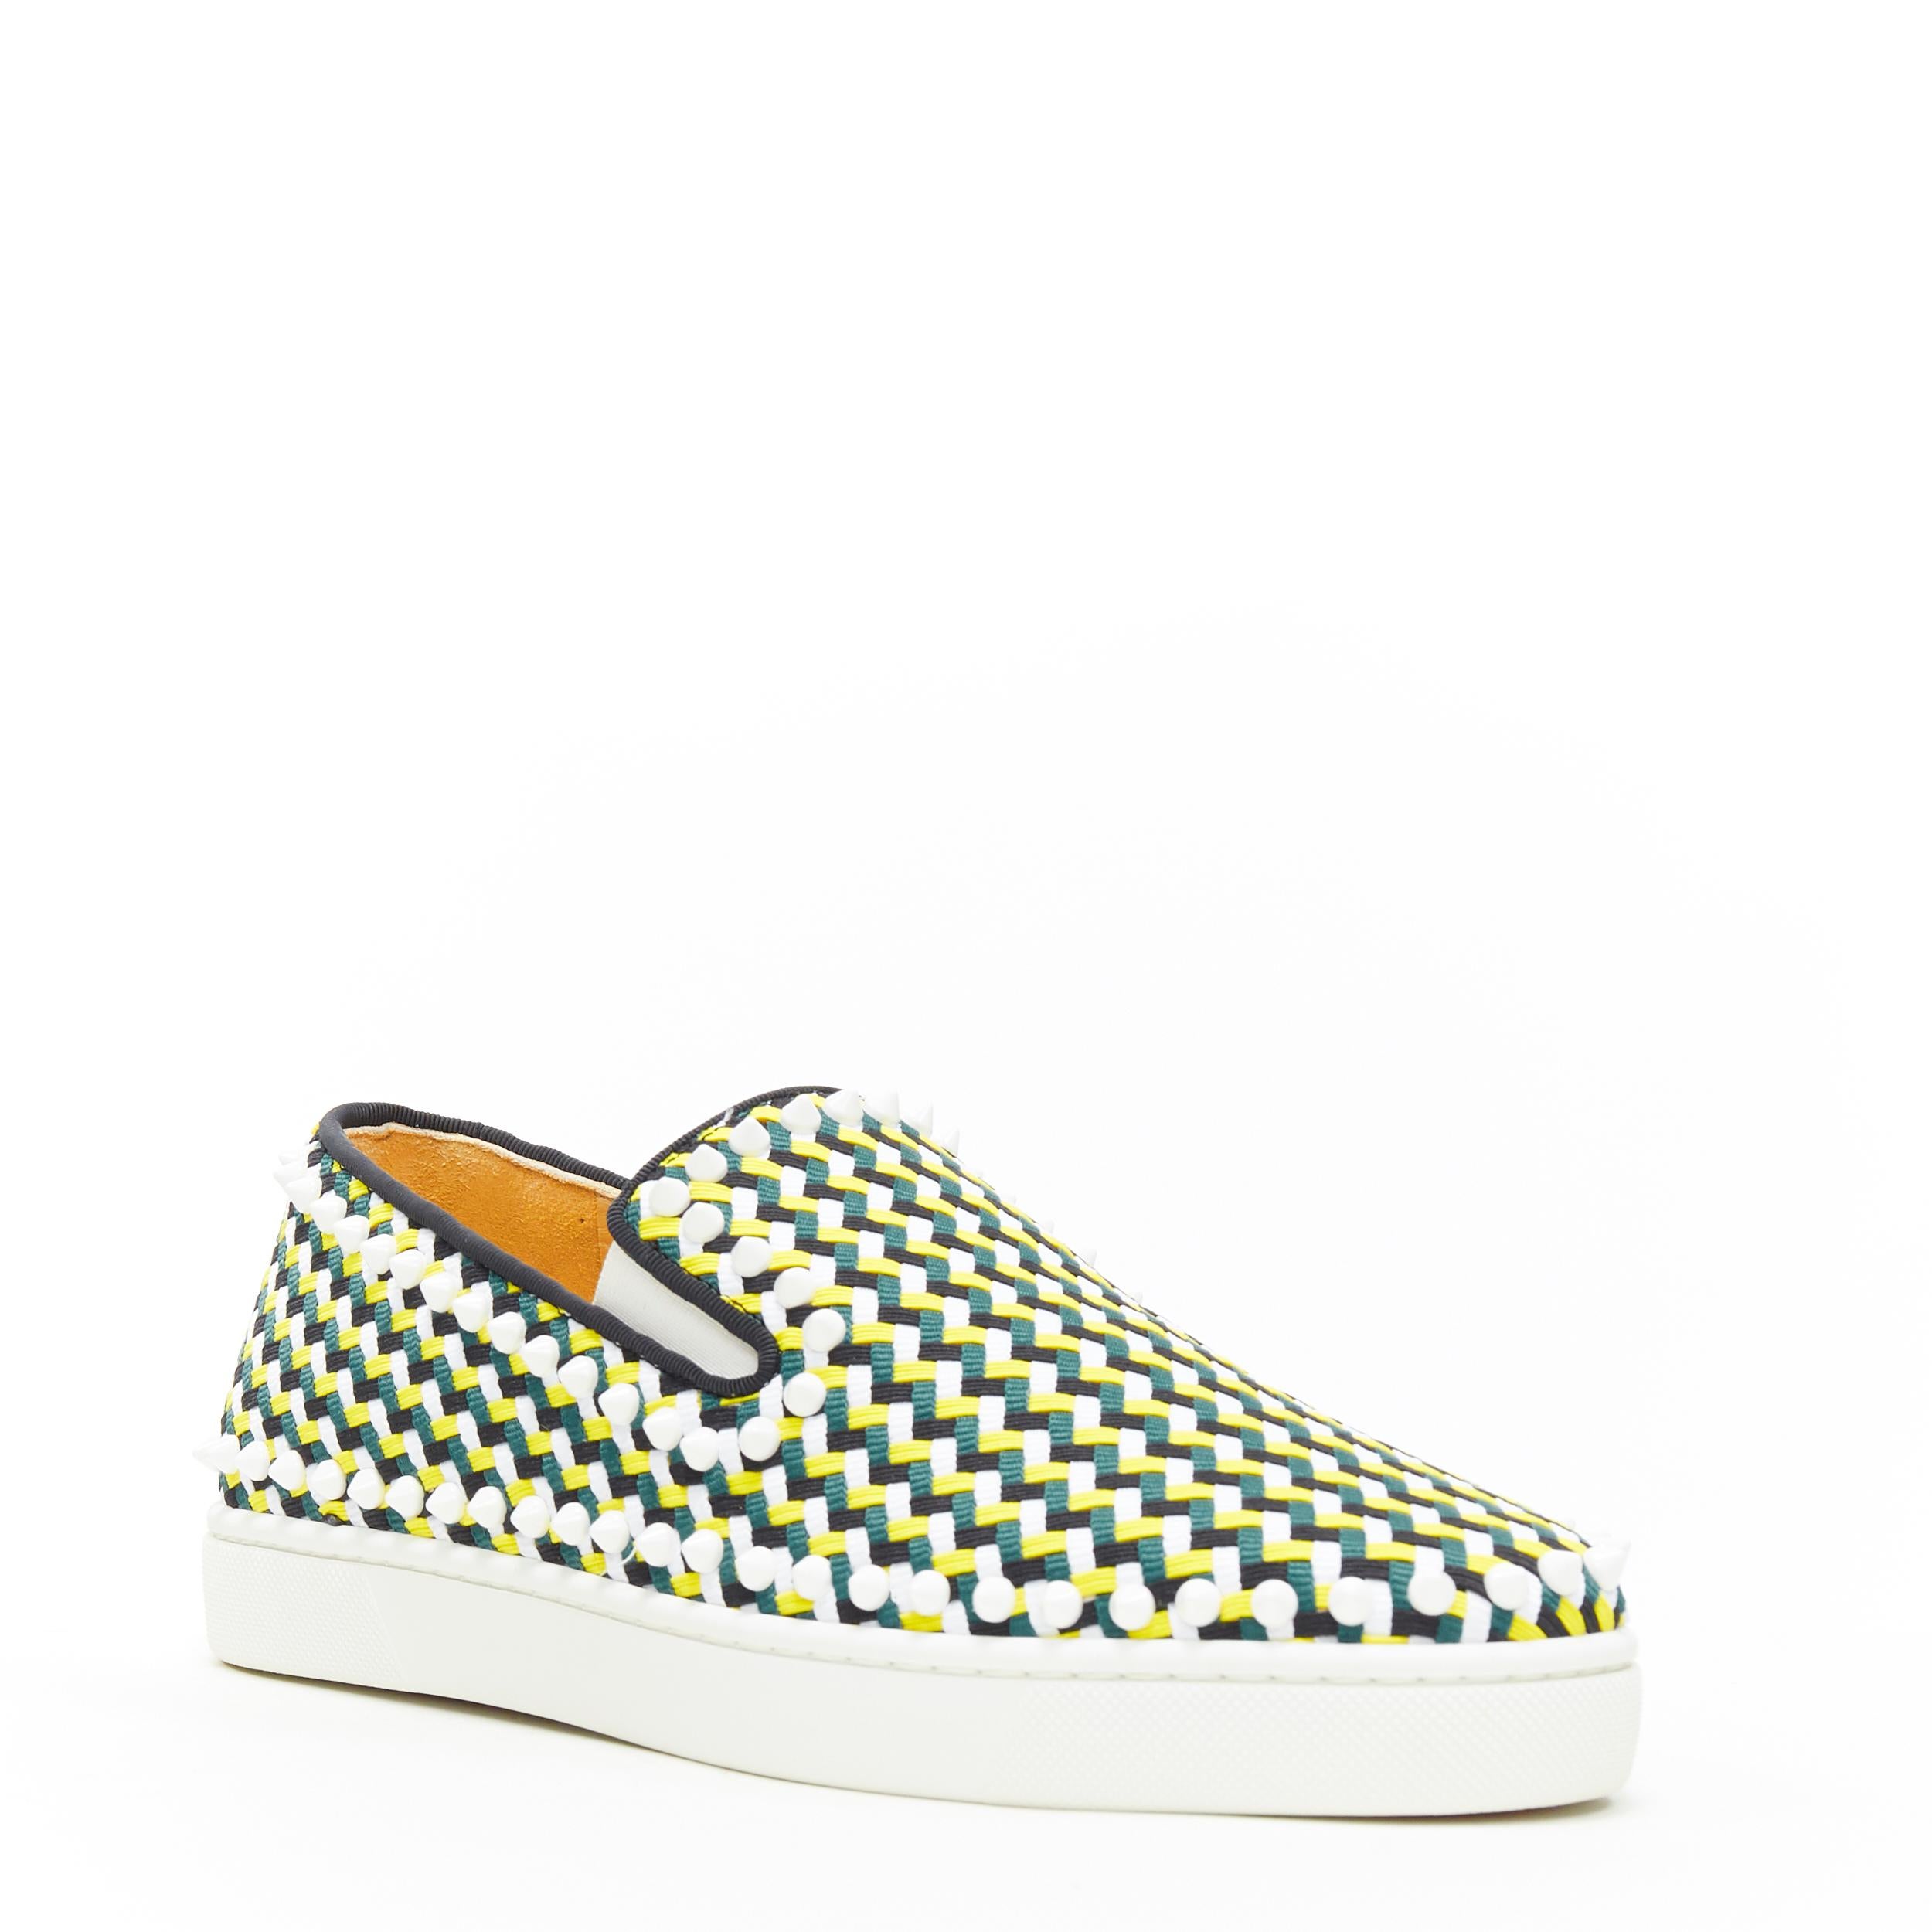 new CHRISTIAN LOUBOUTIN Pik Boat Flat  Zig Zag yellow green woven sneakers EU40
Brand: Christian Louboutin
Designer: Christian Louboutin
Model Name / Style: Pik Boat
Material: Leather
Color: Green
Pattern: Geometric
Closure: Slip on
Extra Detail: